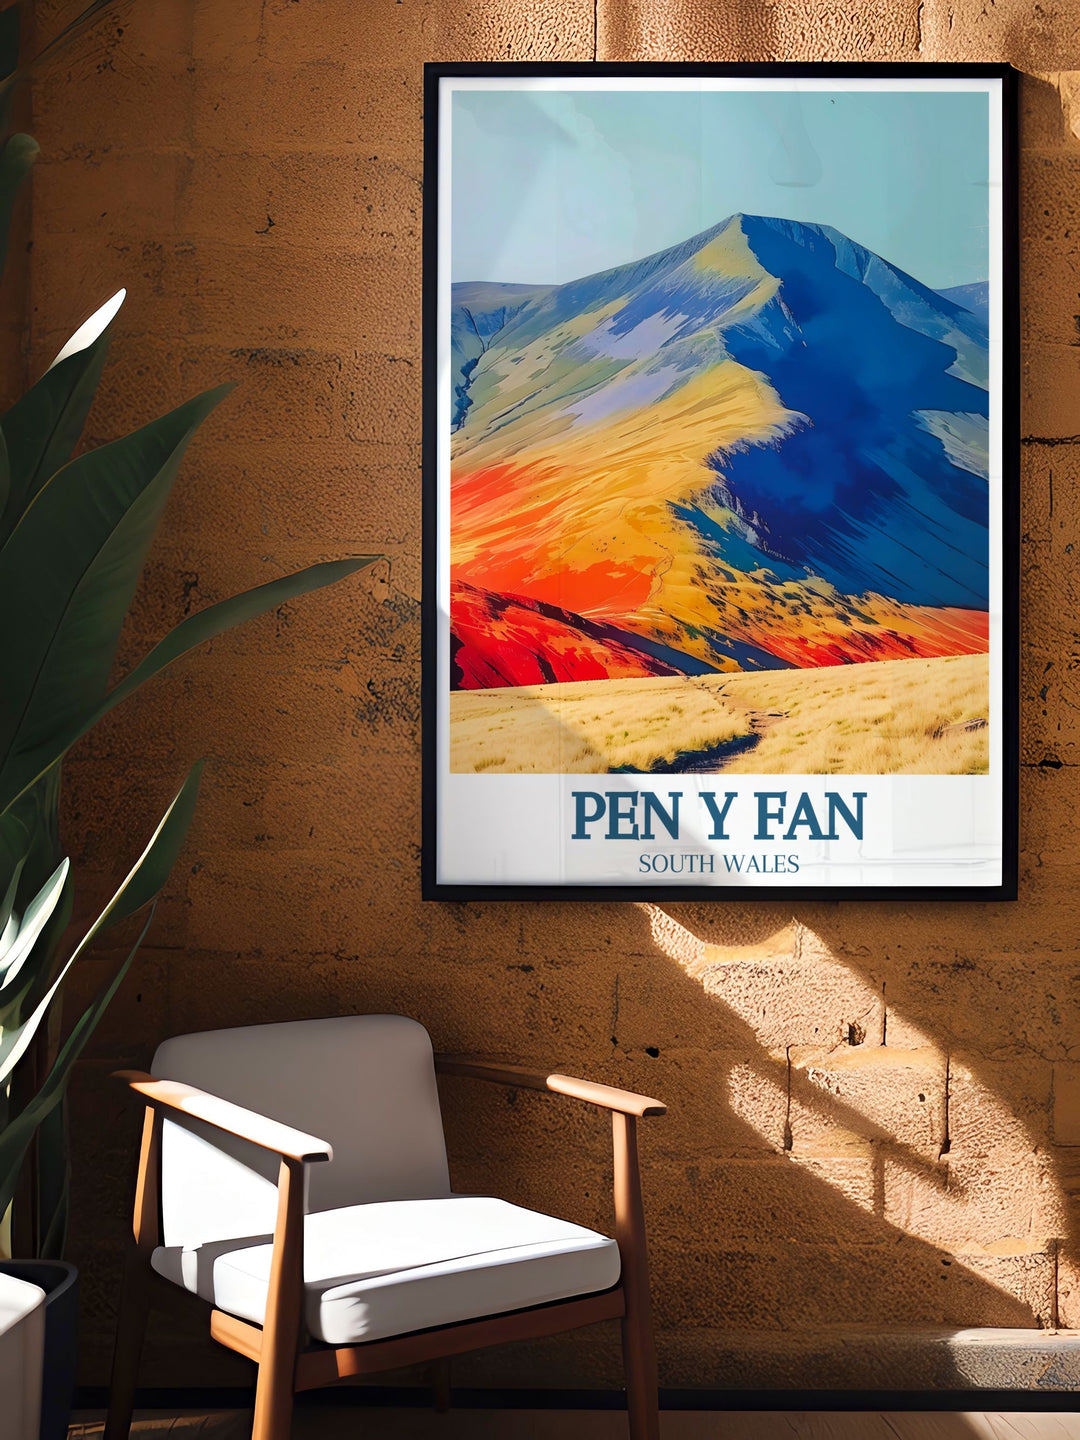 Captivating Brecon Beacons wall art with a focus on the stunning Pen Y Fan Mountain. Perfect for adding a touch of South Wales natural beauty to any room, this poster is ideal for nature lovers and adventurers.